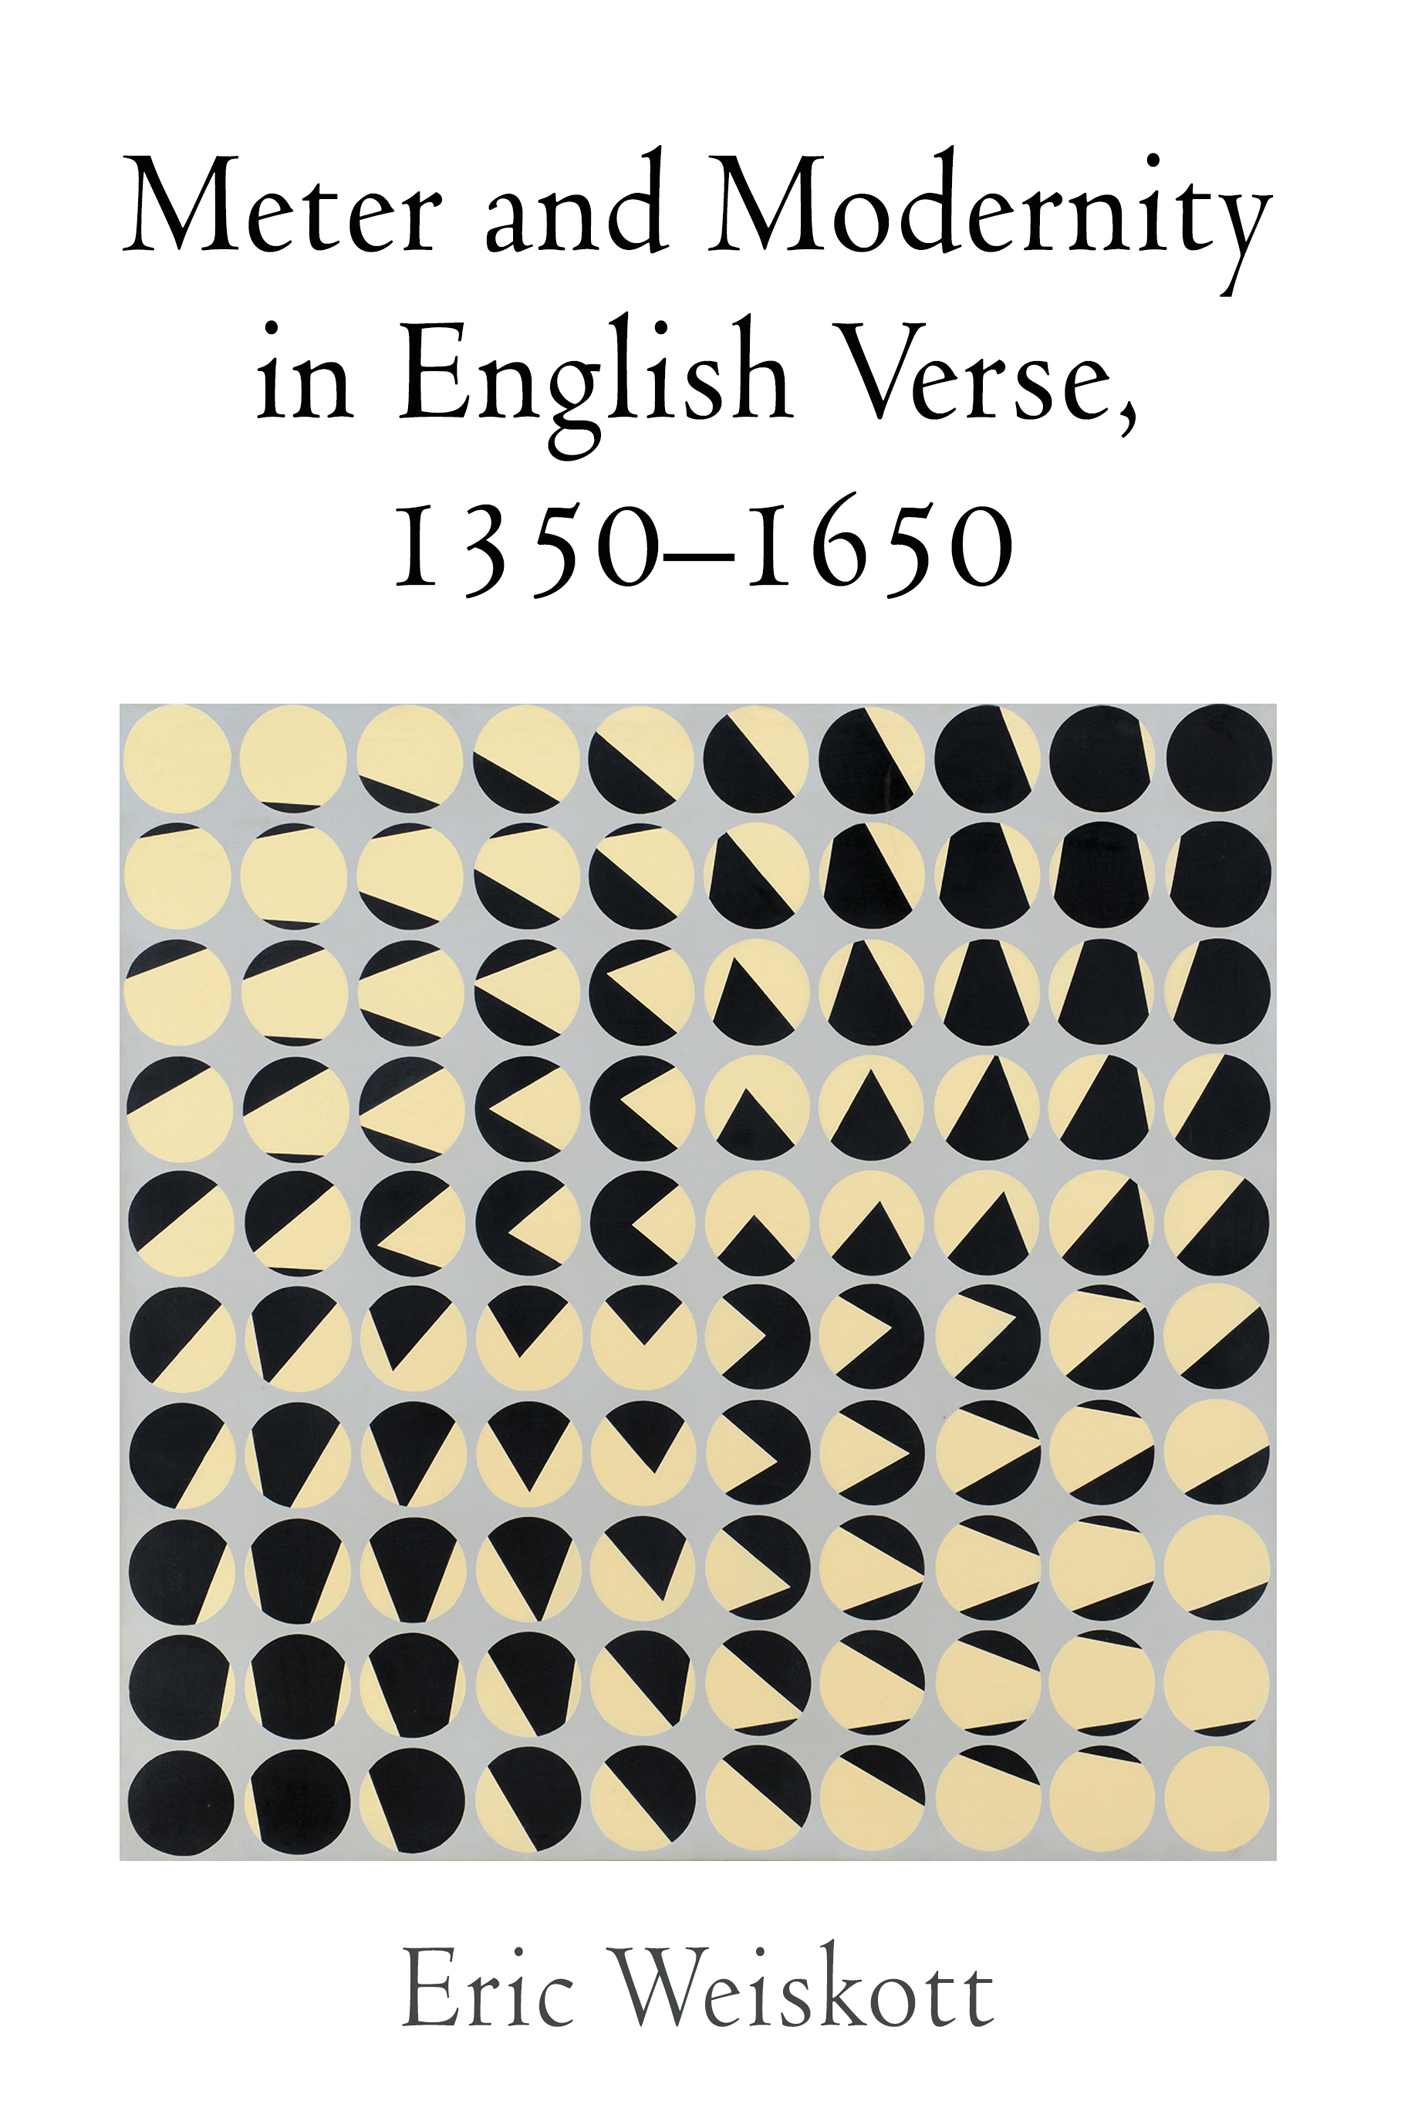 Meter and Modernity in English Verse 1350-1650 - image 1